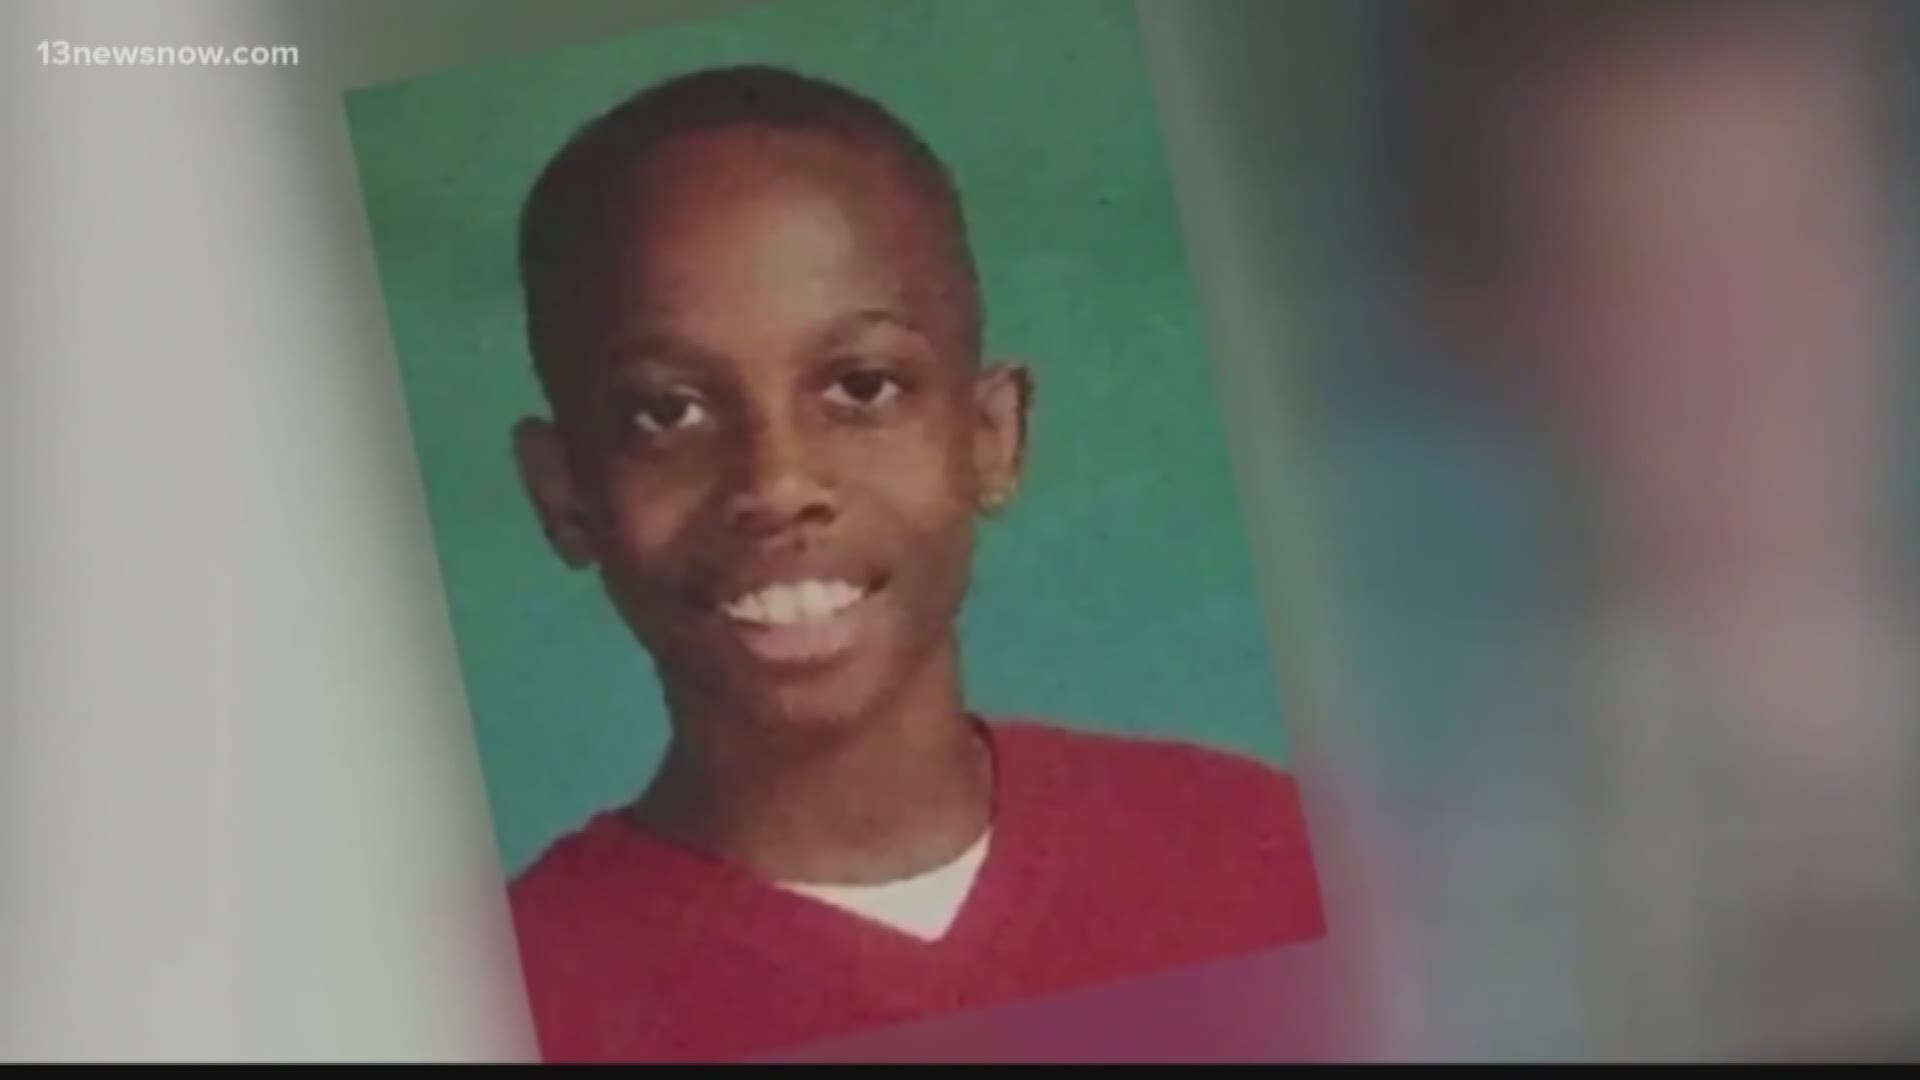 Quincy Davis' body was found about three years ago during a traffic stop and has been held ever since at the medical examiner's office as evidence in his mother's case.